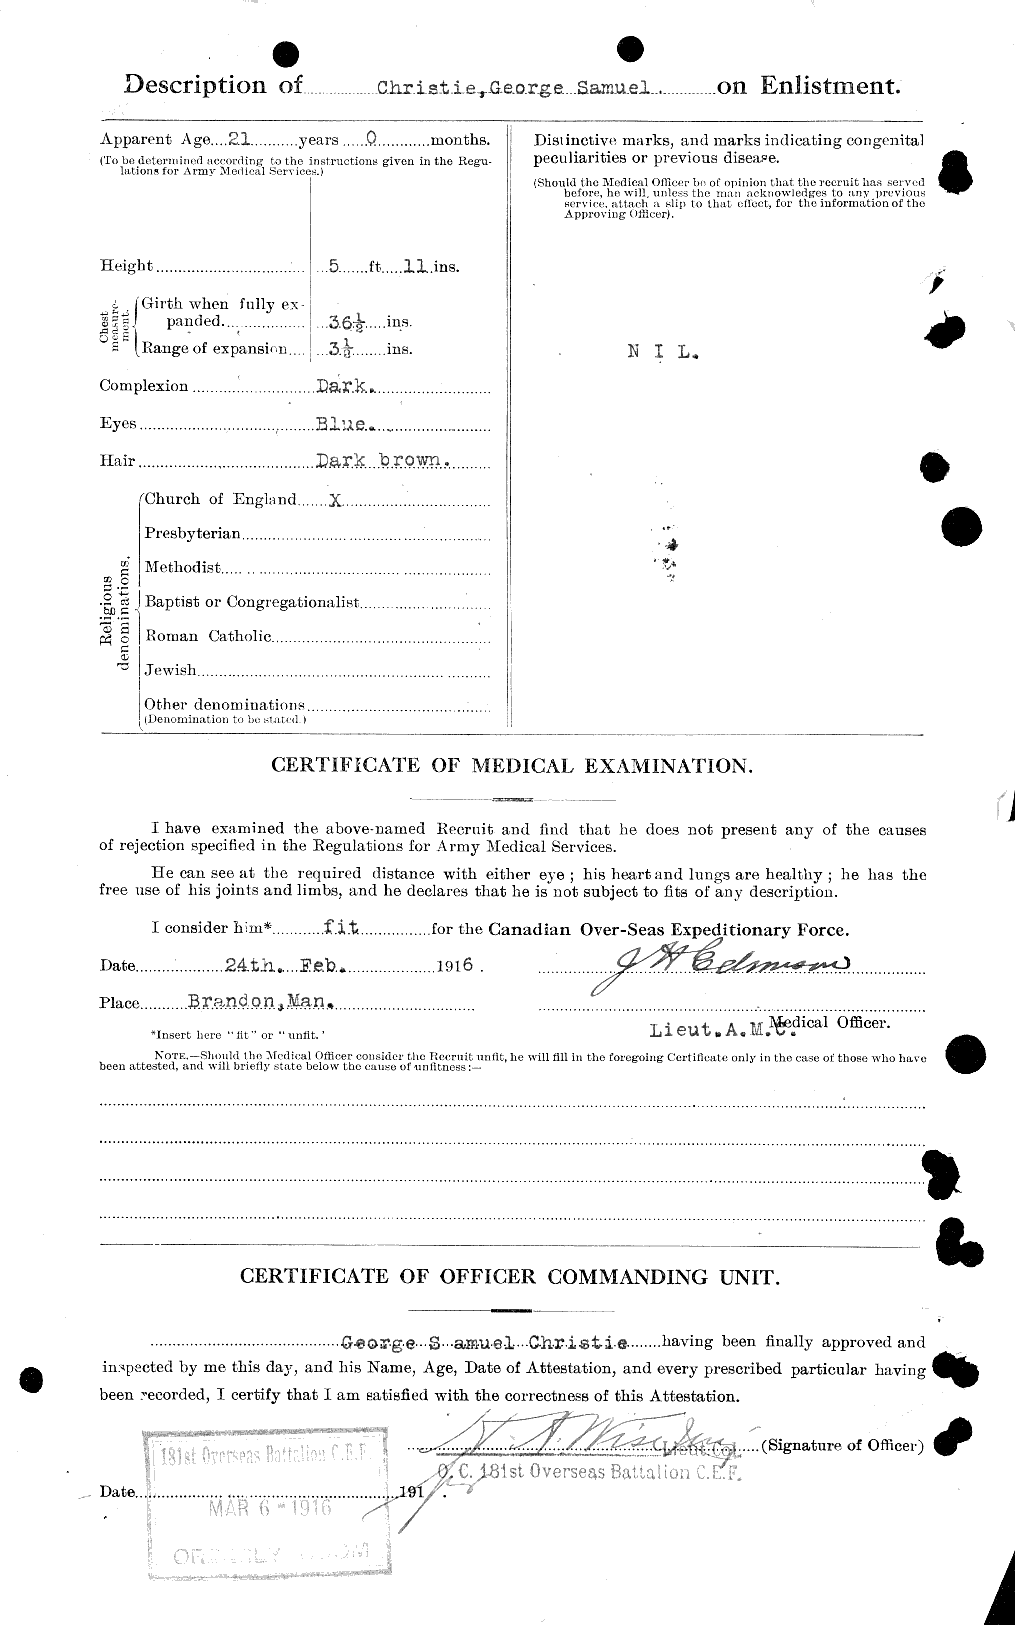 Personnel Records of the First World War - CEF 021949b